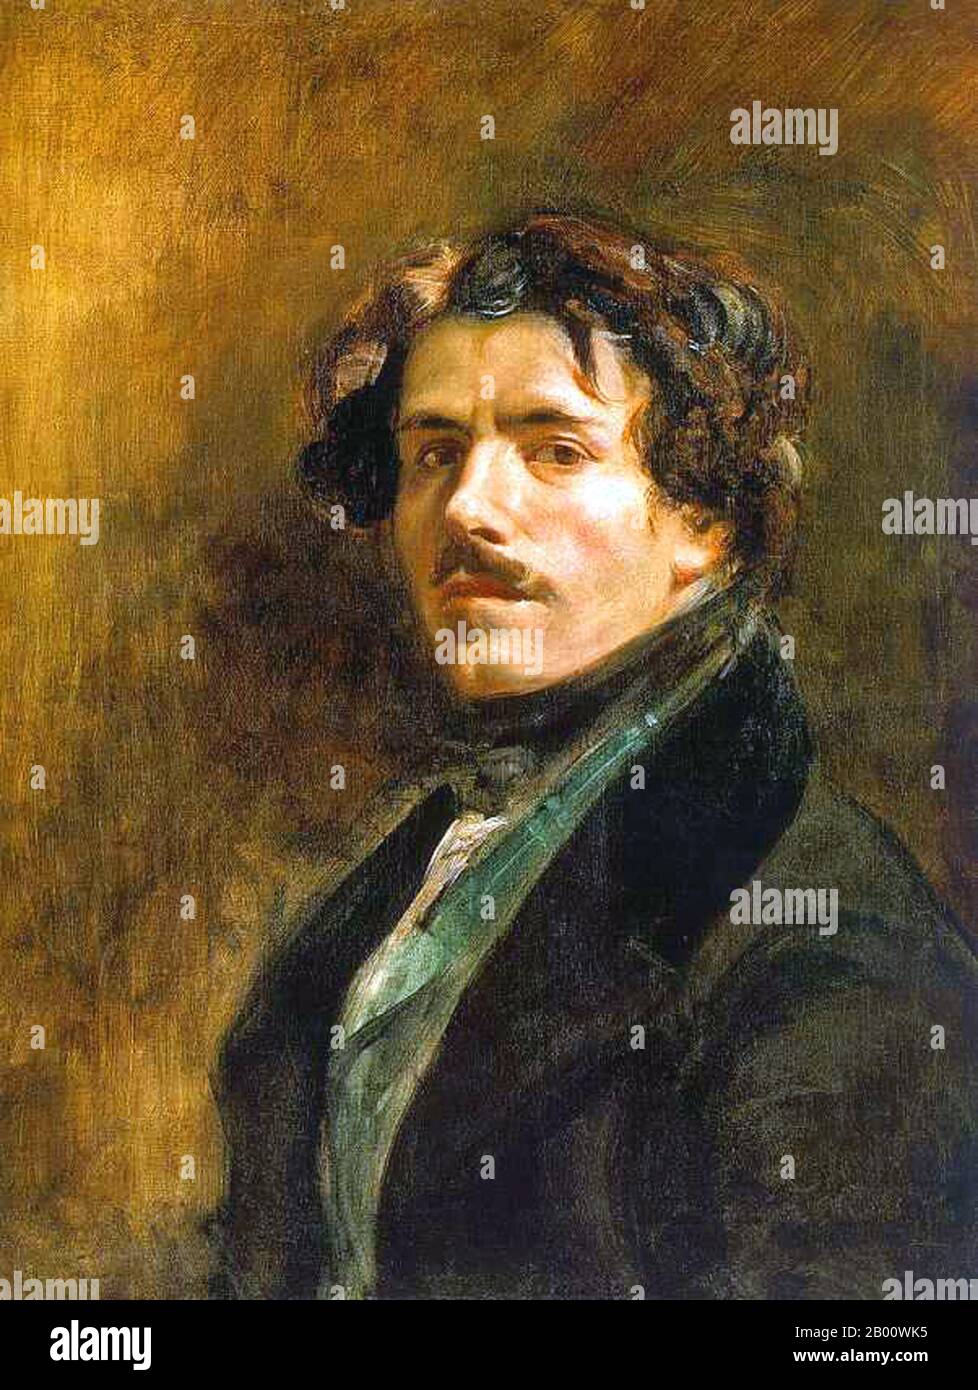 France:  'Self-Portrait in a Green Vest'. Ink on canvas painting by Eugène Delacroix (1798 – 1863), c. 1837.  Ferdinand Victor Eugène Delacroix (26 April 1798 – 13 August 1863) was a French Romantic artist regarded from the outset of his career as the leader of the French Romantic school. Delacroix's use of expressive brushstrokes and his study of the optical effects of colour profoundly shaped the work of the Impressionists, while his passion for the exotic inspired the artists of the Symbolist movement. Stock Photo